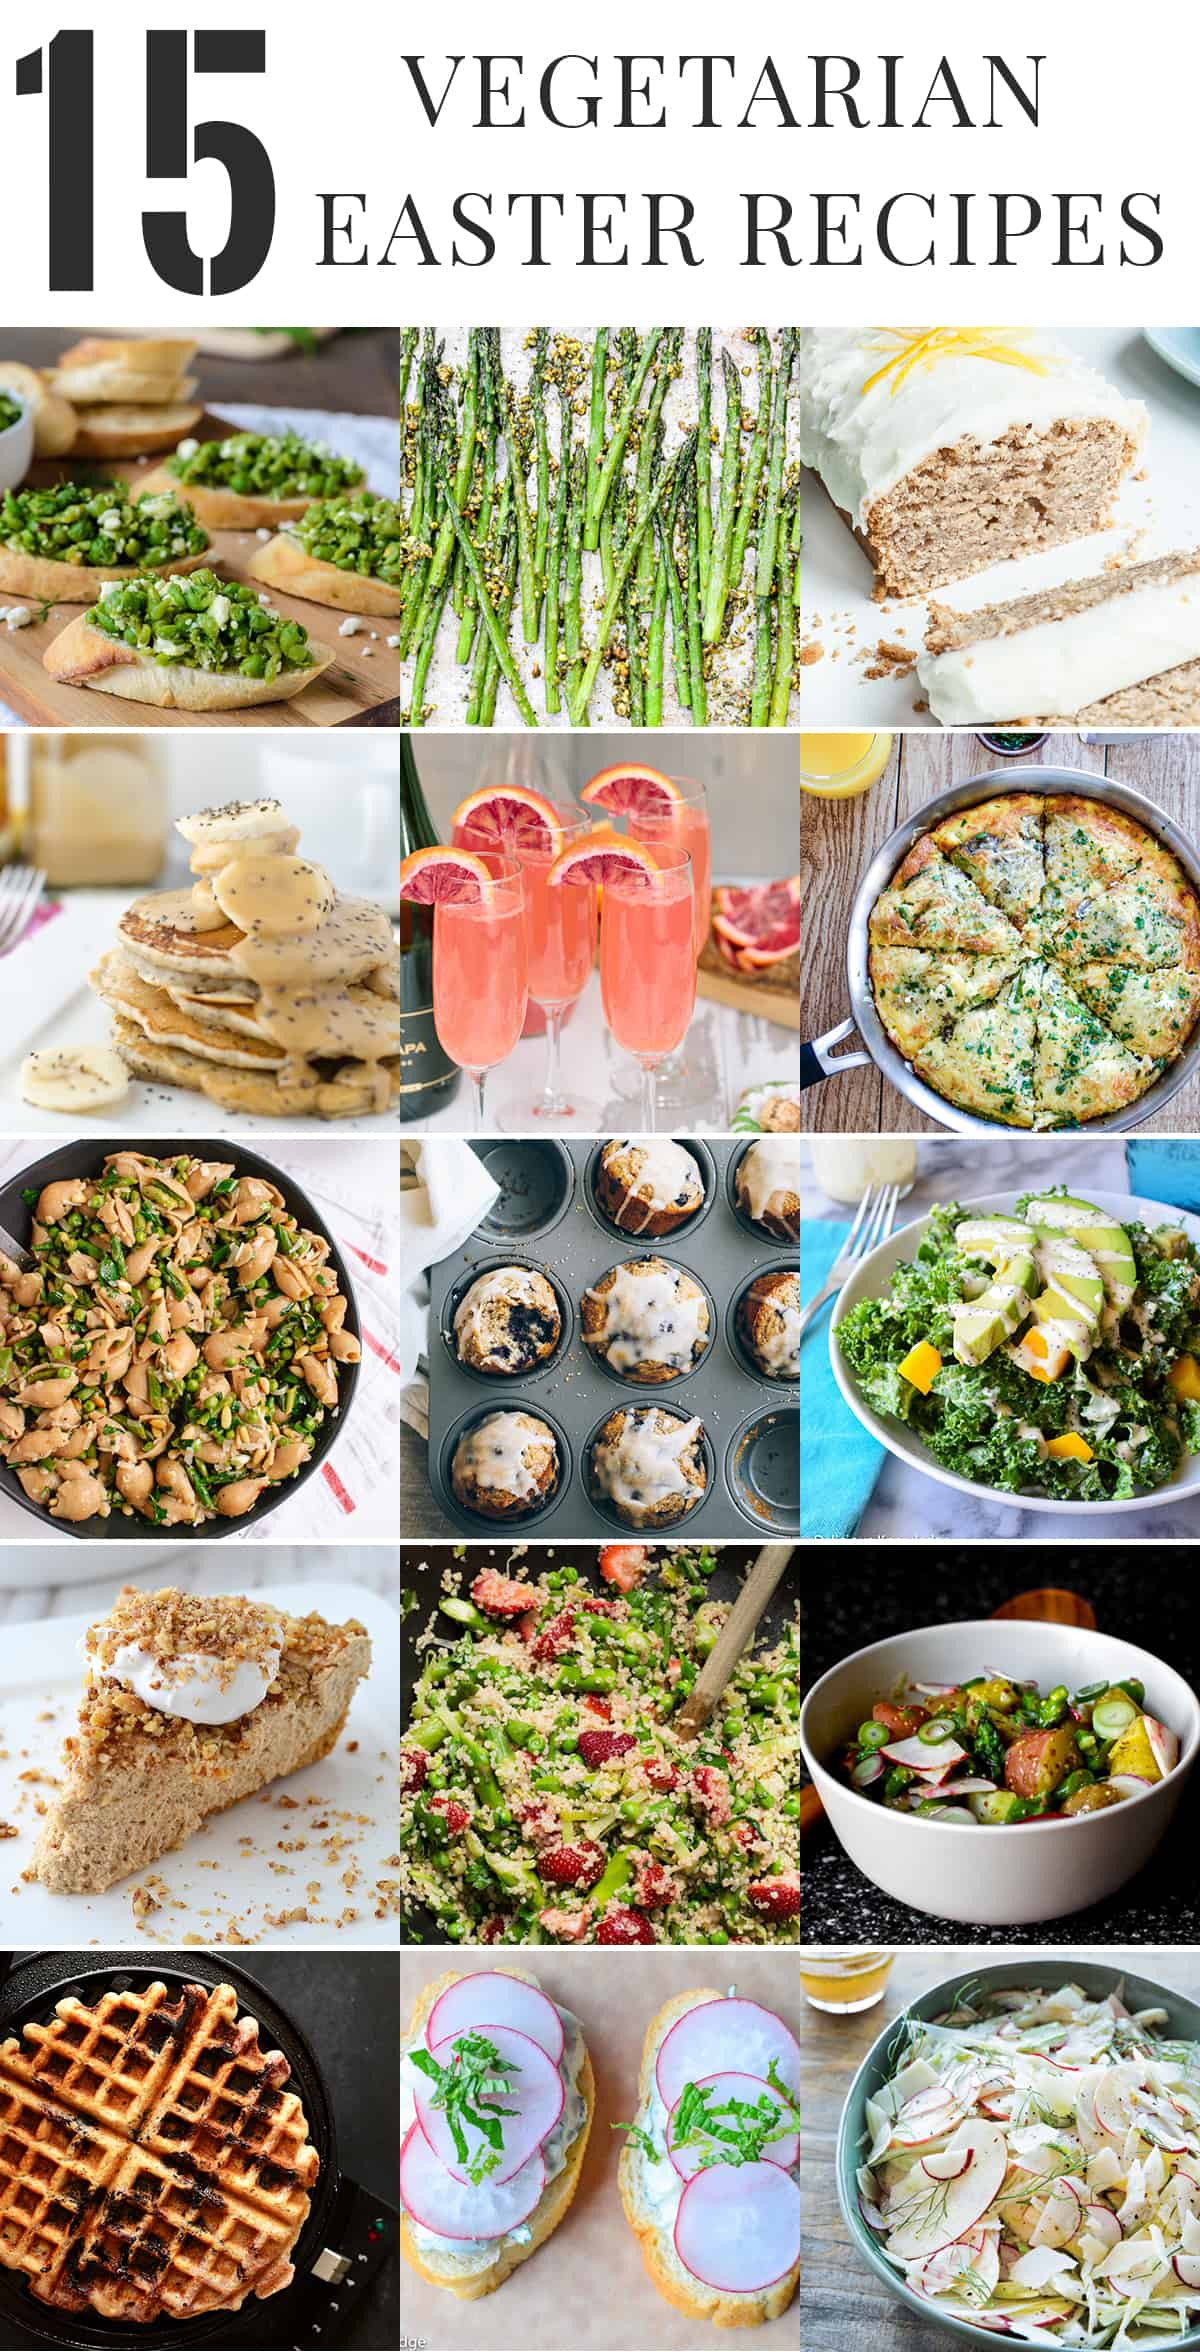 Easter Dinner Vegetable Ideas
 Healthy Ve arian Easter Recipes Delish Knowledge